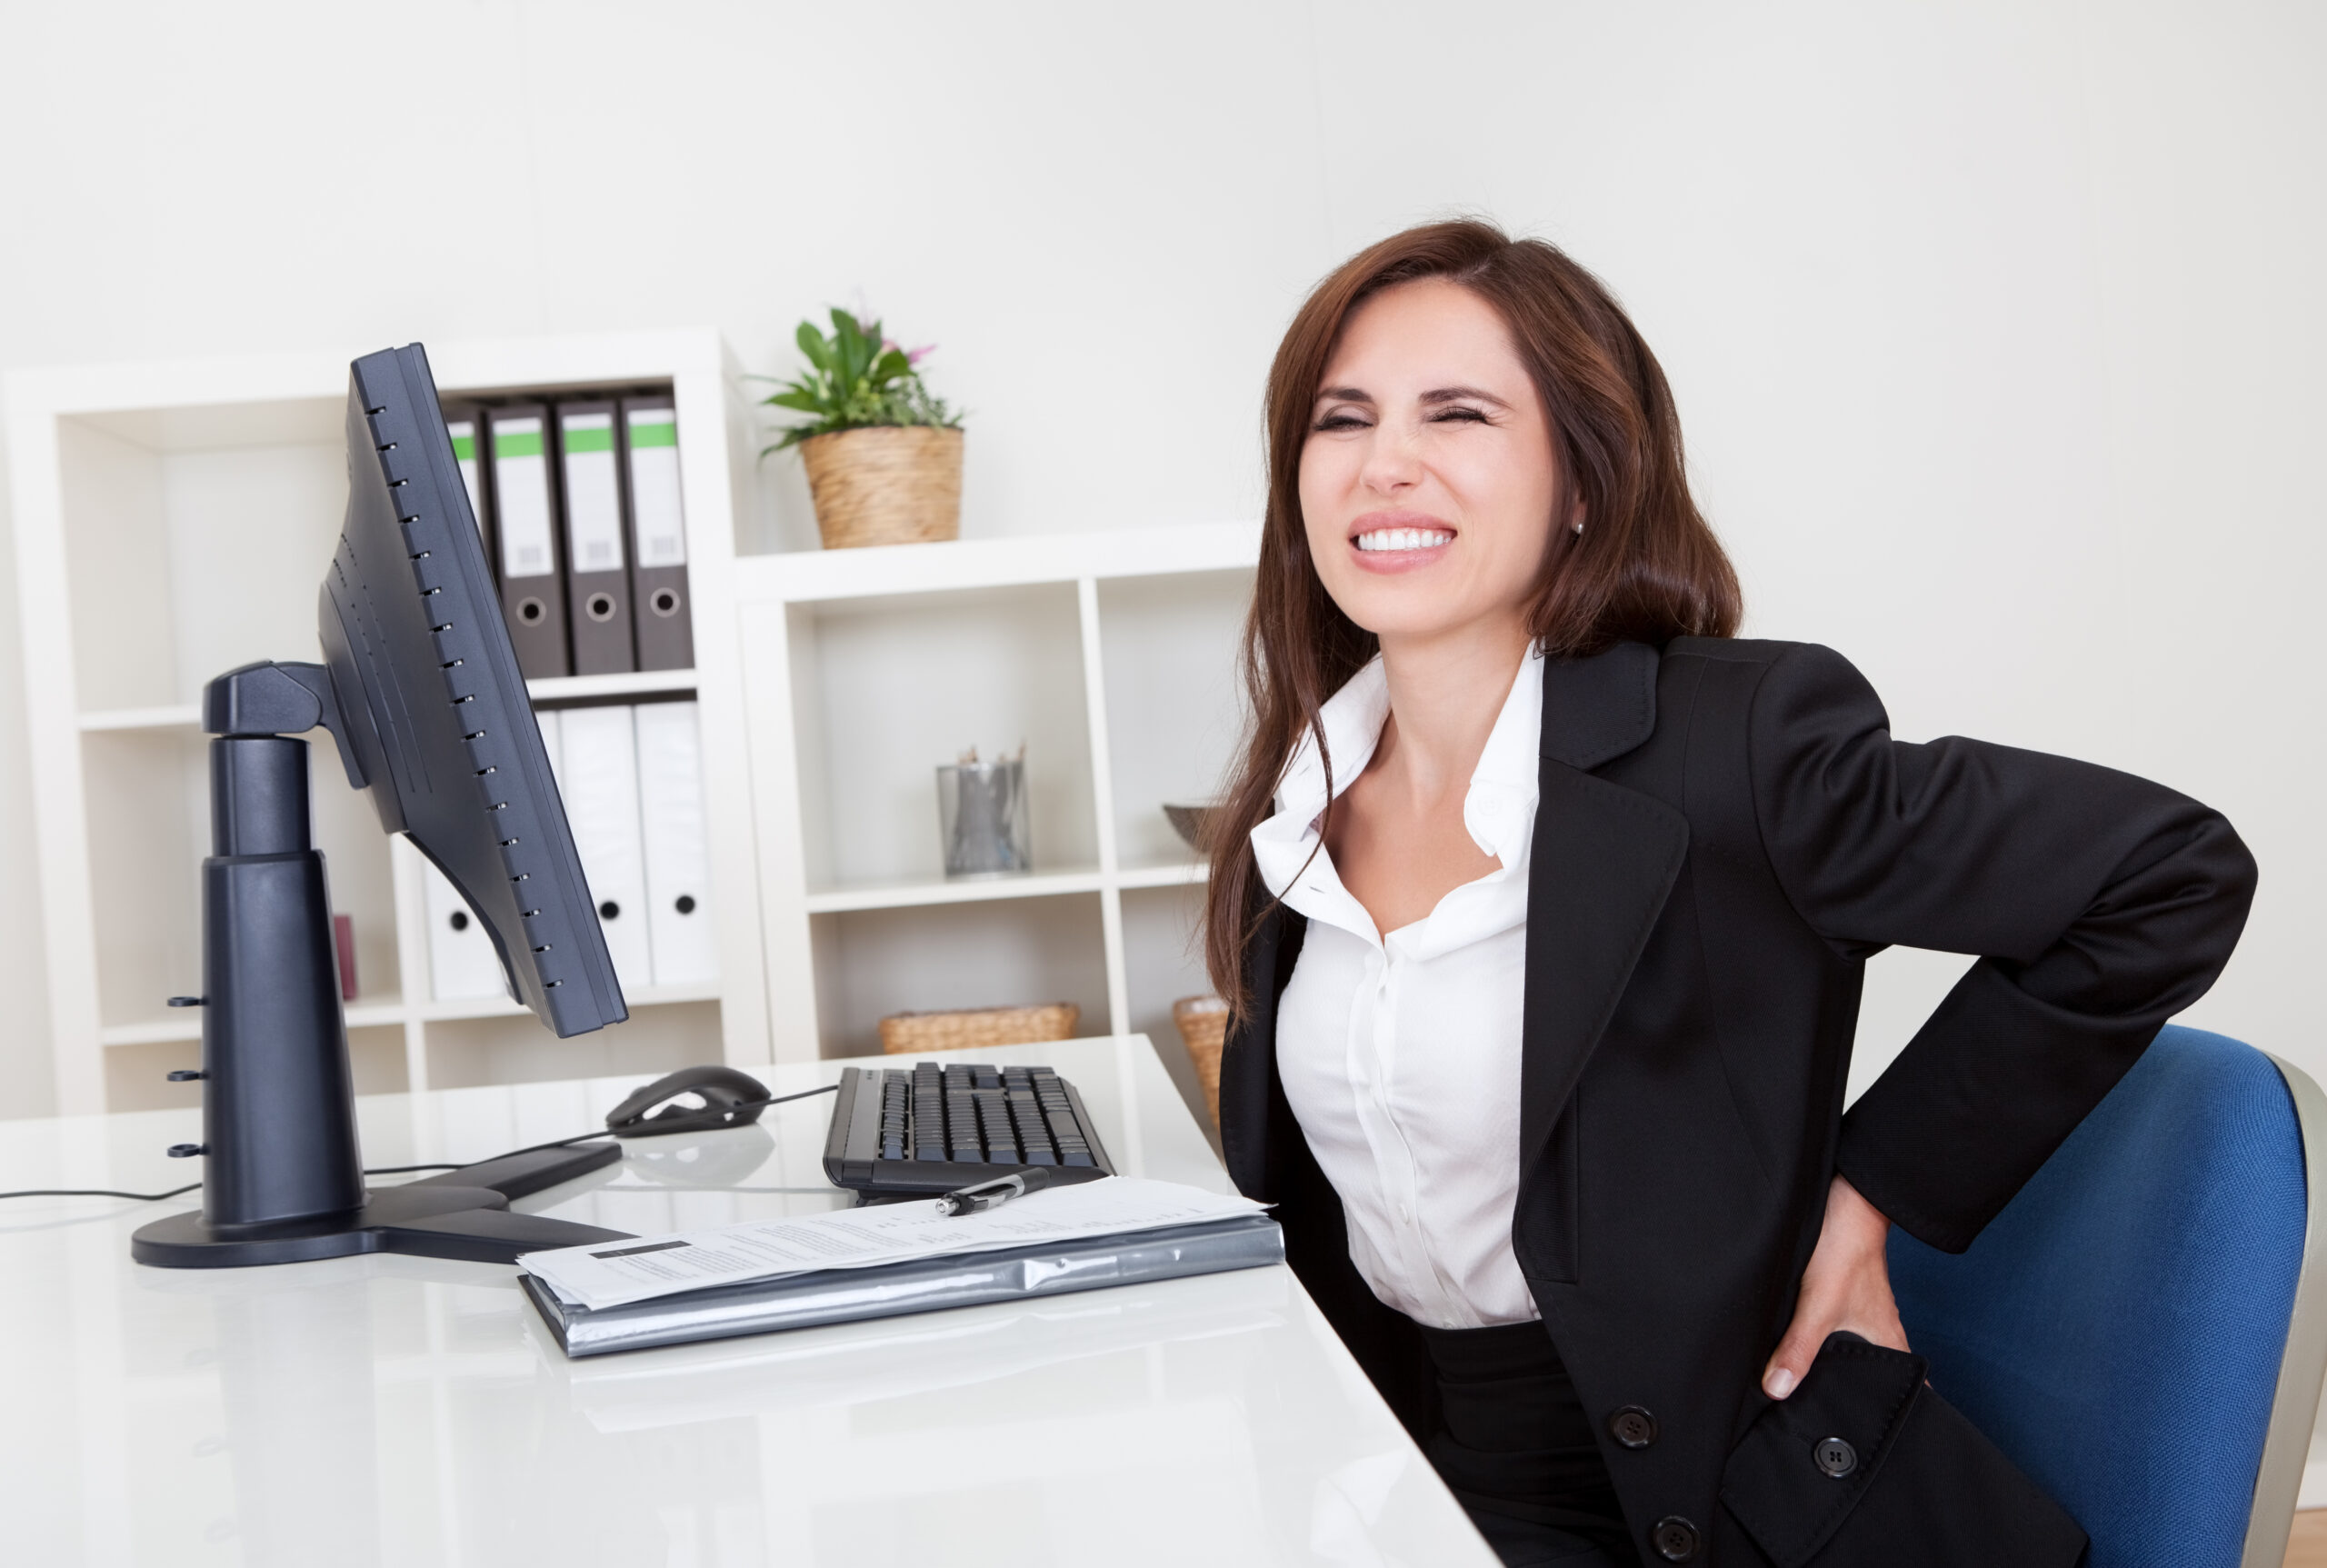 Stay Out of Pain! An Ergonomic Work Space is Step 1